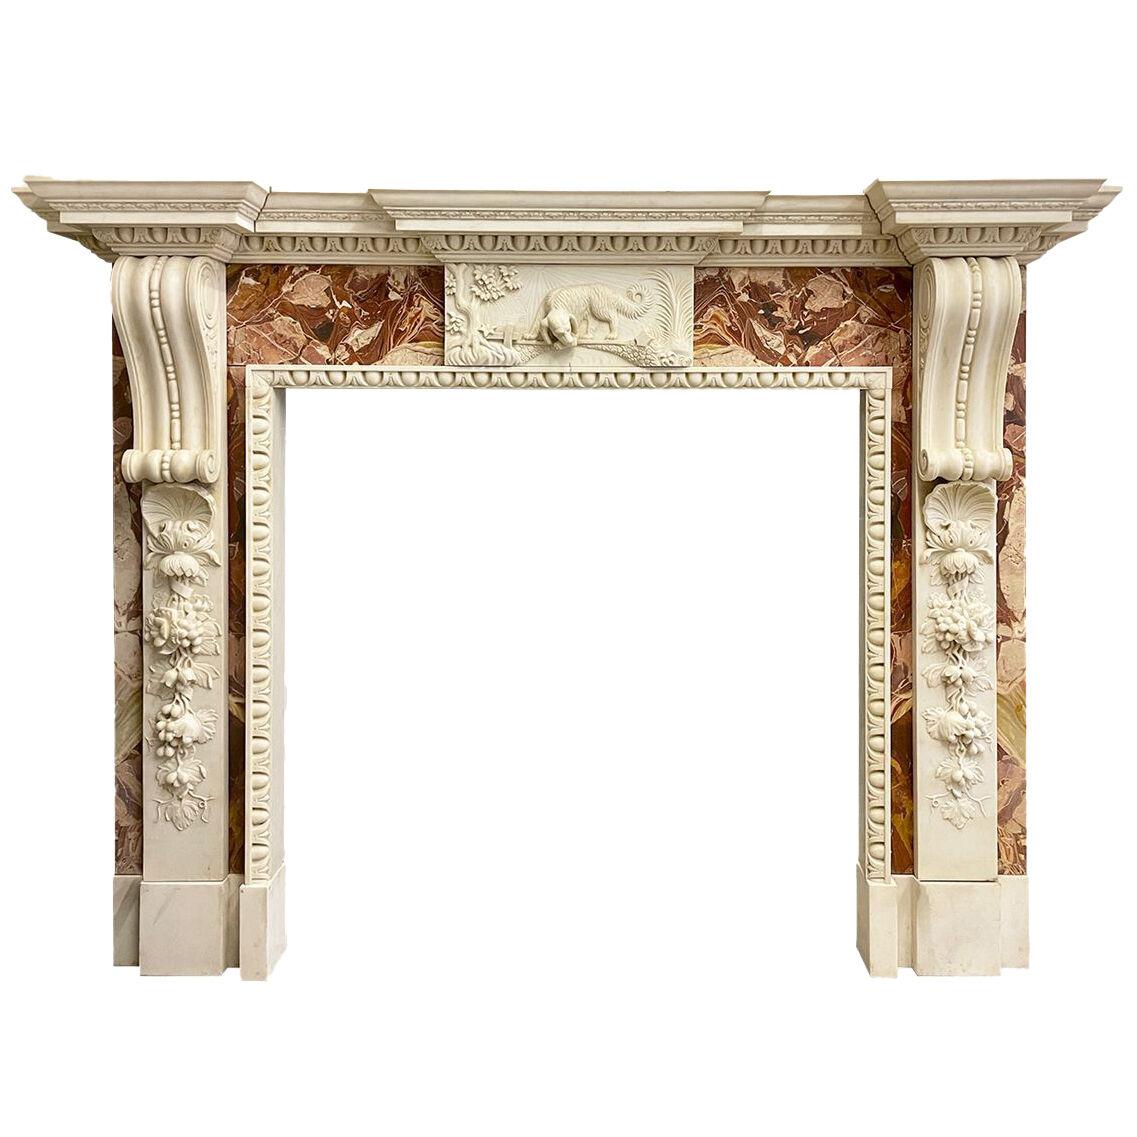 A Large Georgian Style Jasper and White Marble Fireplace Mantel